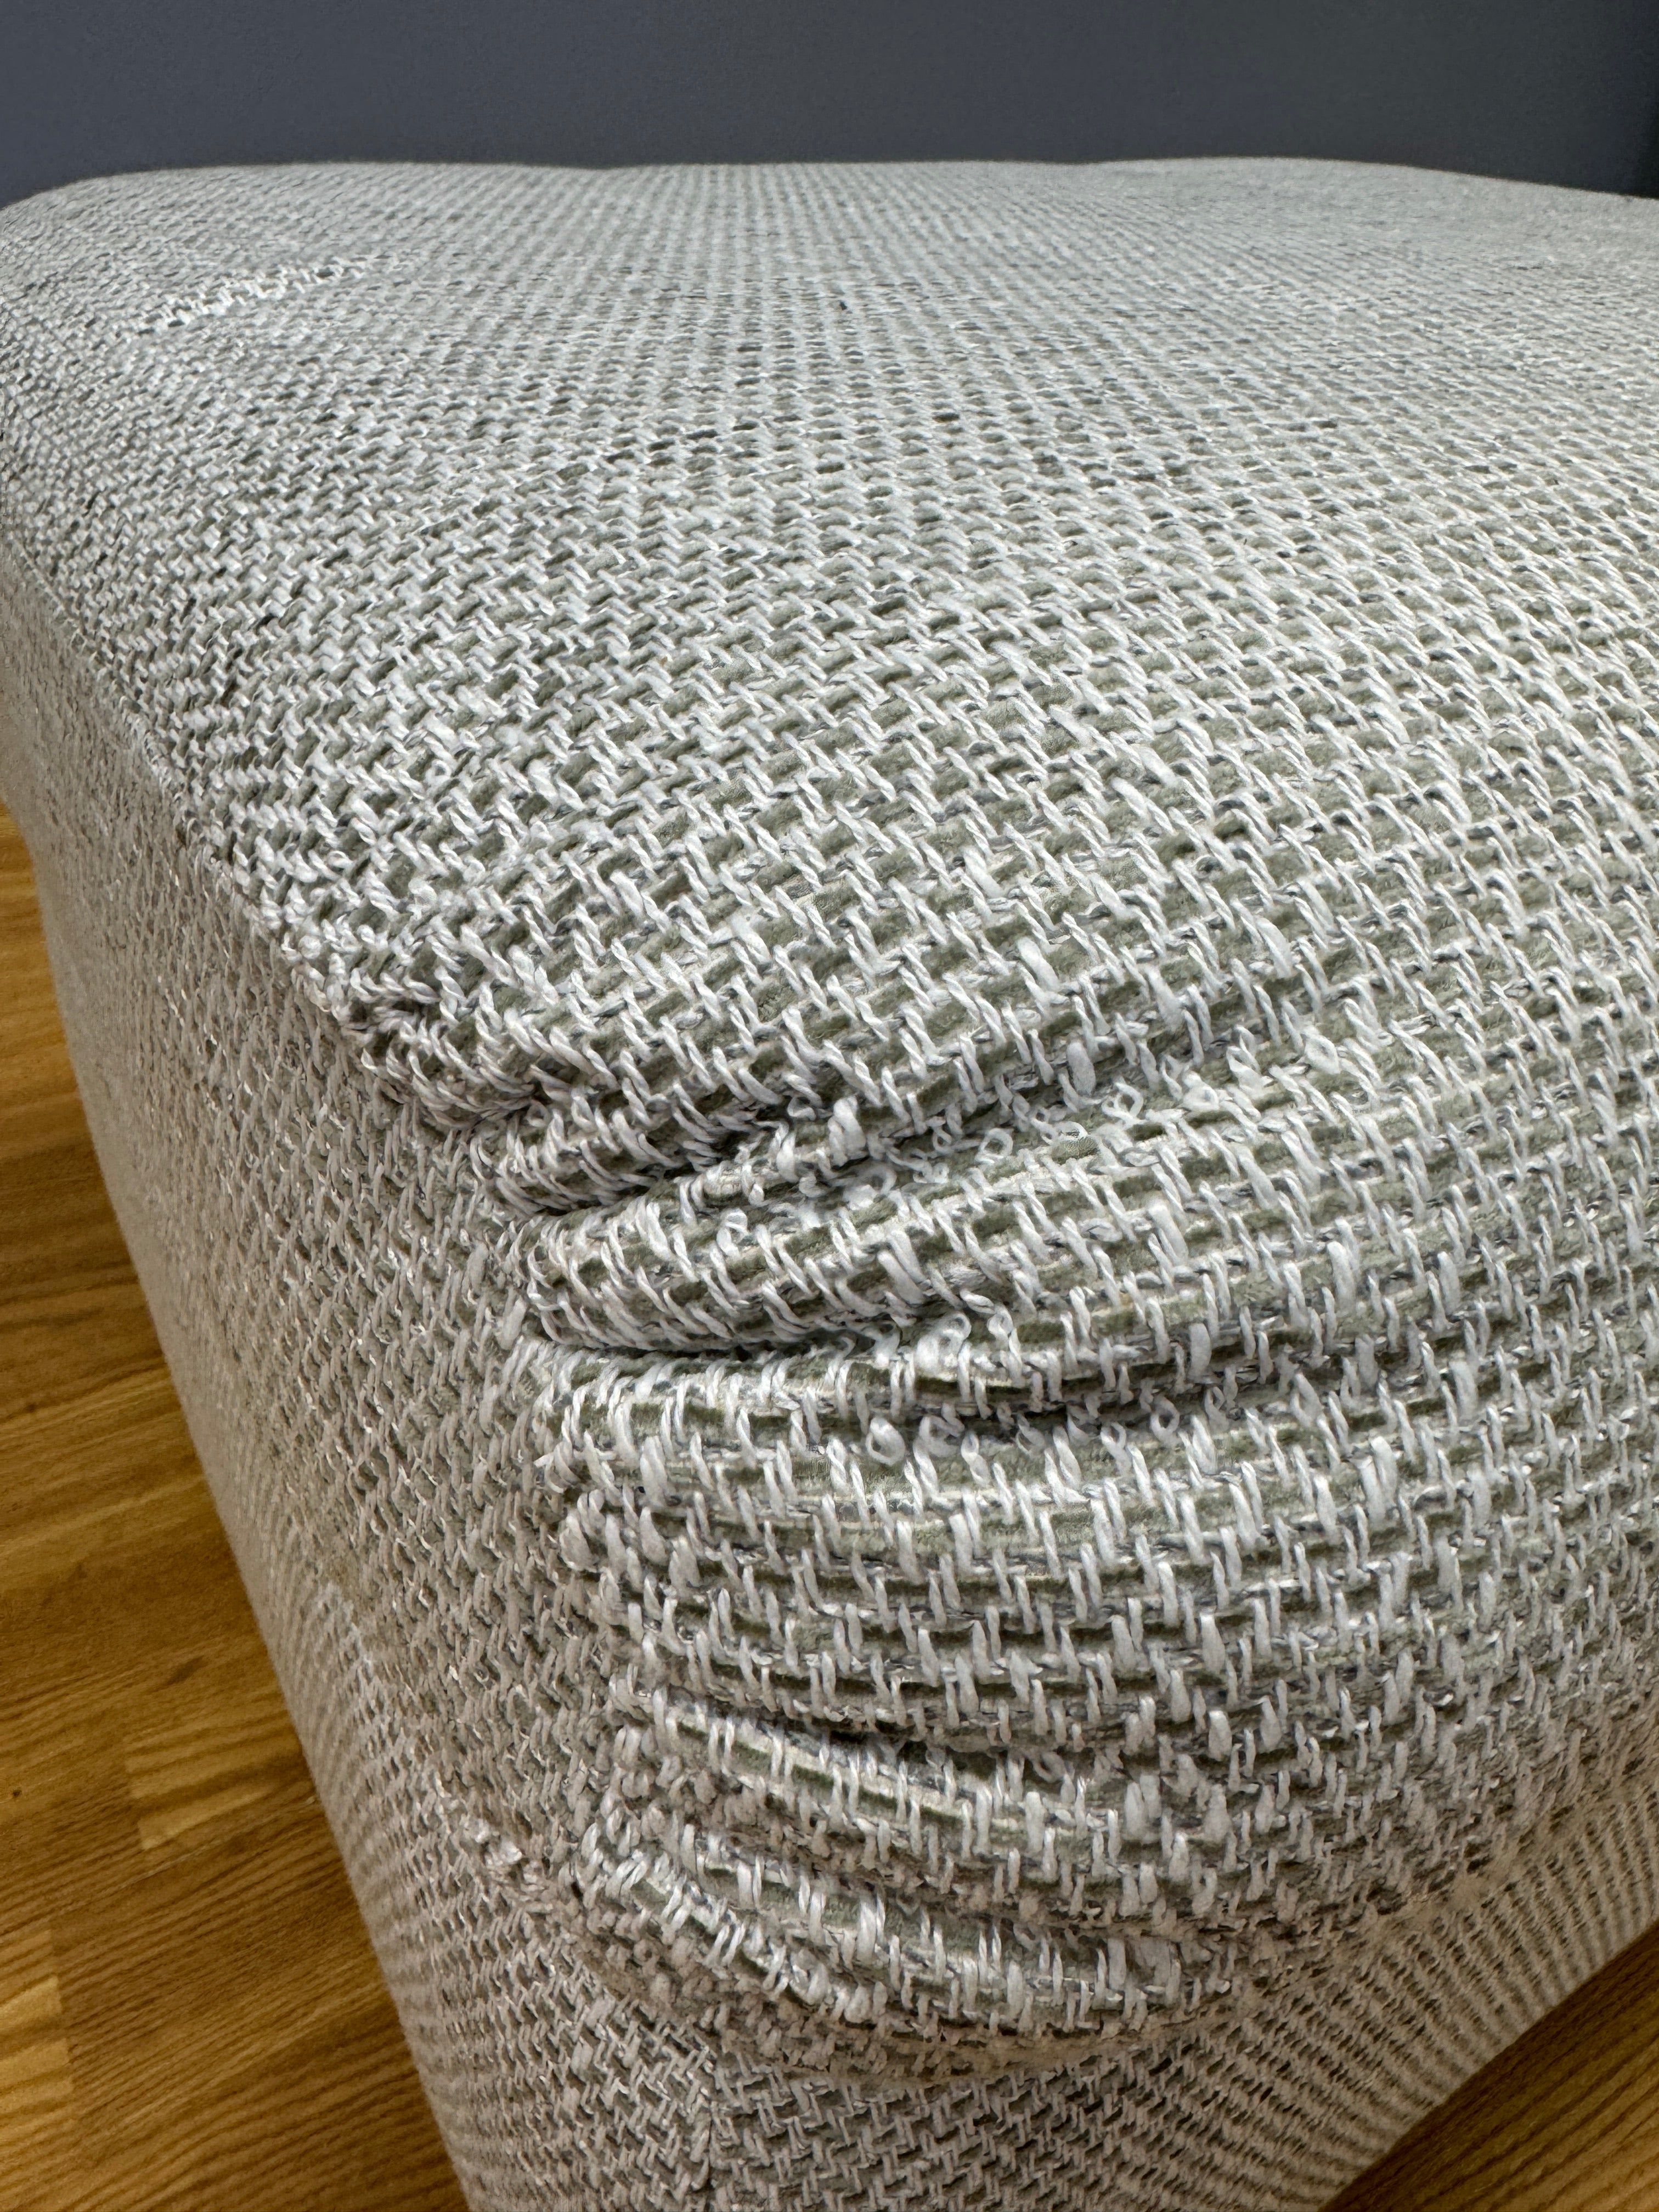 G PLAN NEWMARKET padded top footstool in light grey weave fabric